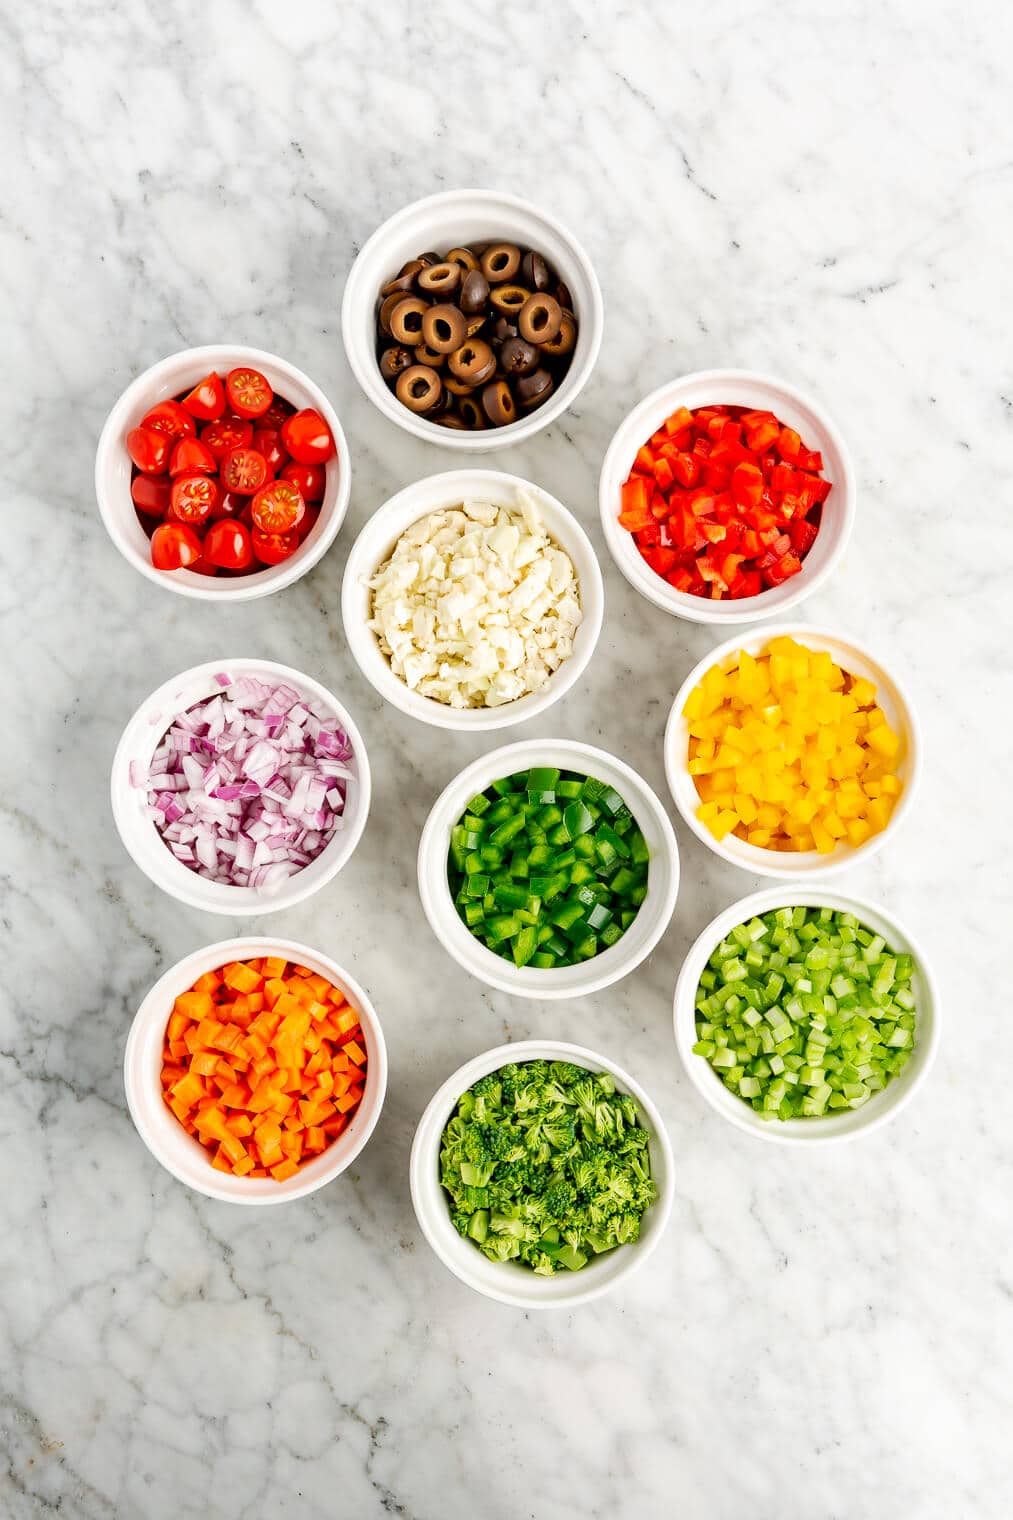 All of the chopped veggie ingredients for an Italian pasta salad in separate little white bowls on a marble surface.